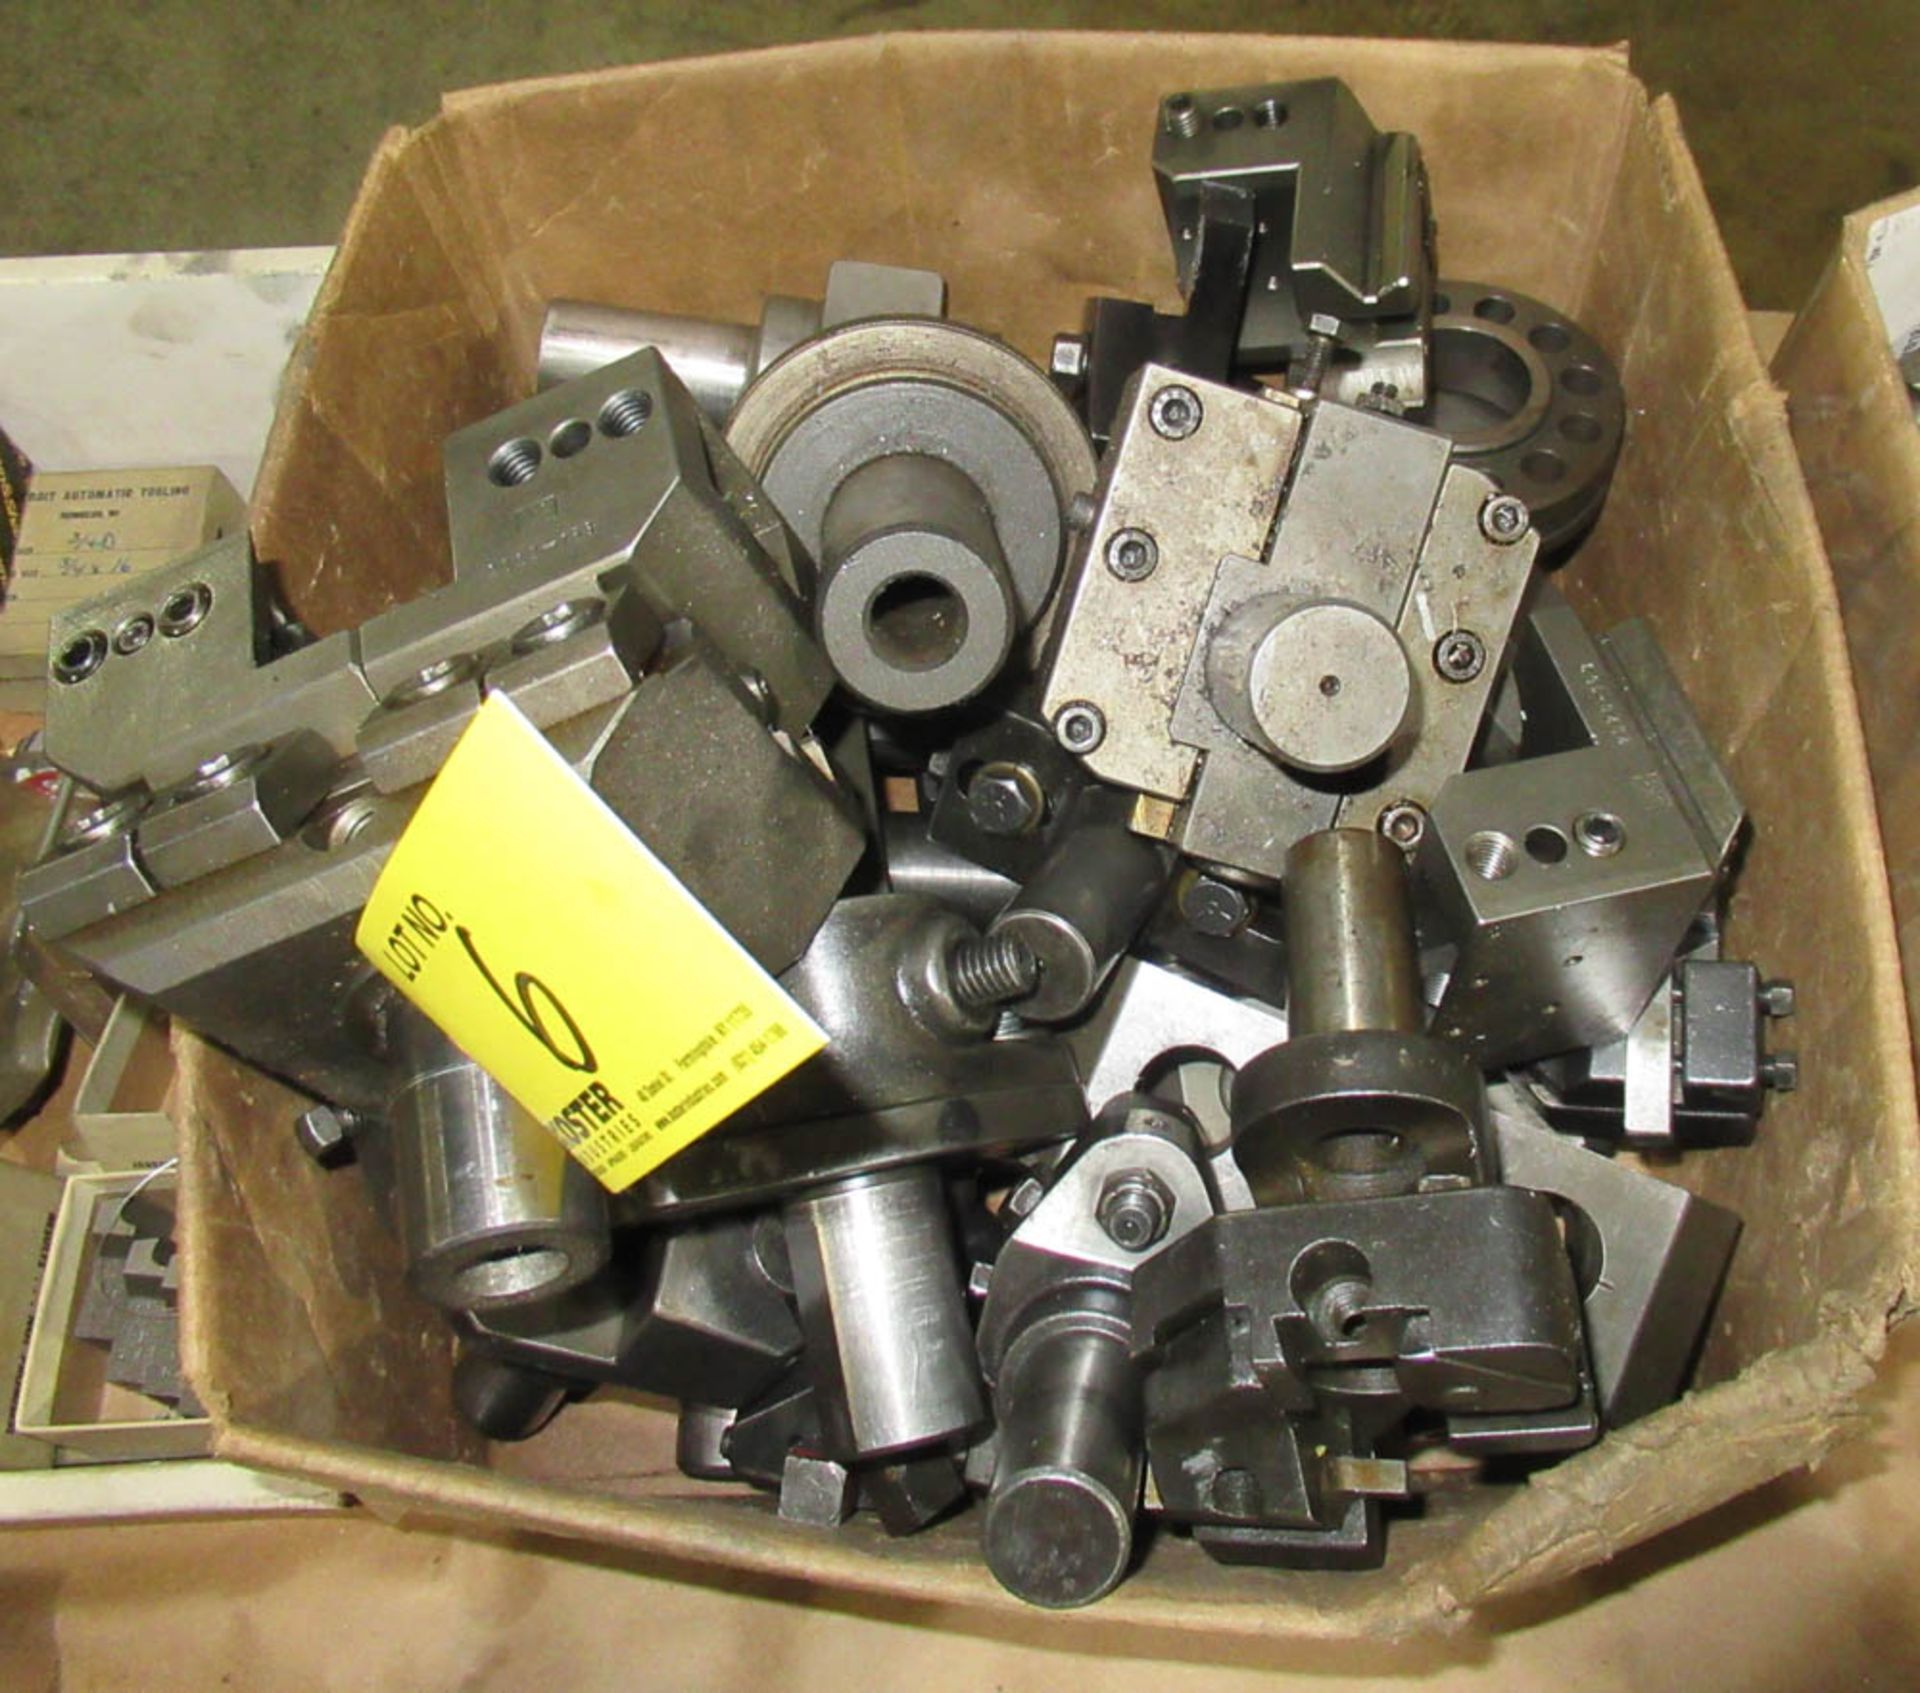 LOT OF TURRET TOOL HOLDERS [LOCATED IN CLIFTON, NJ]